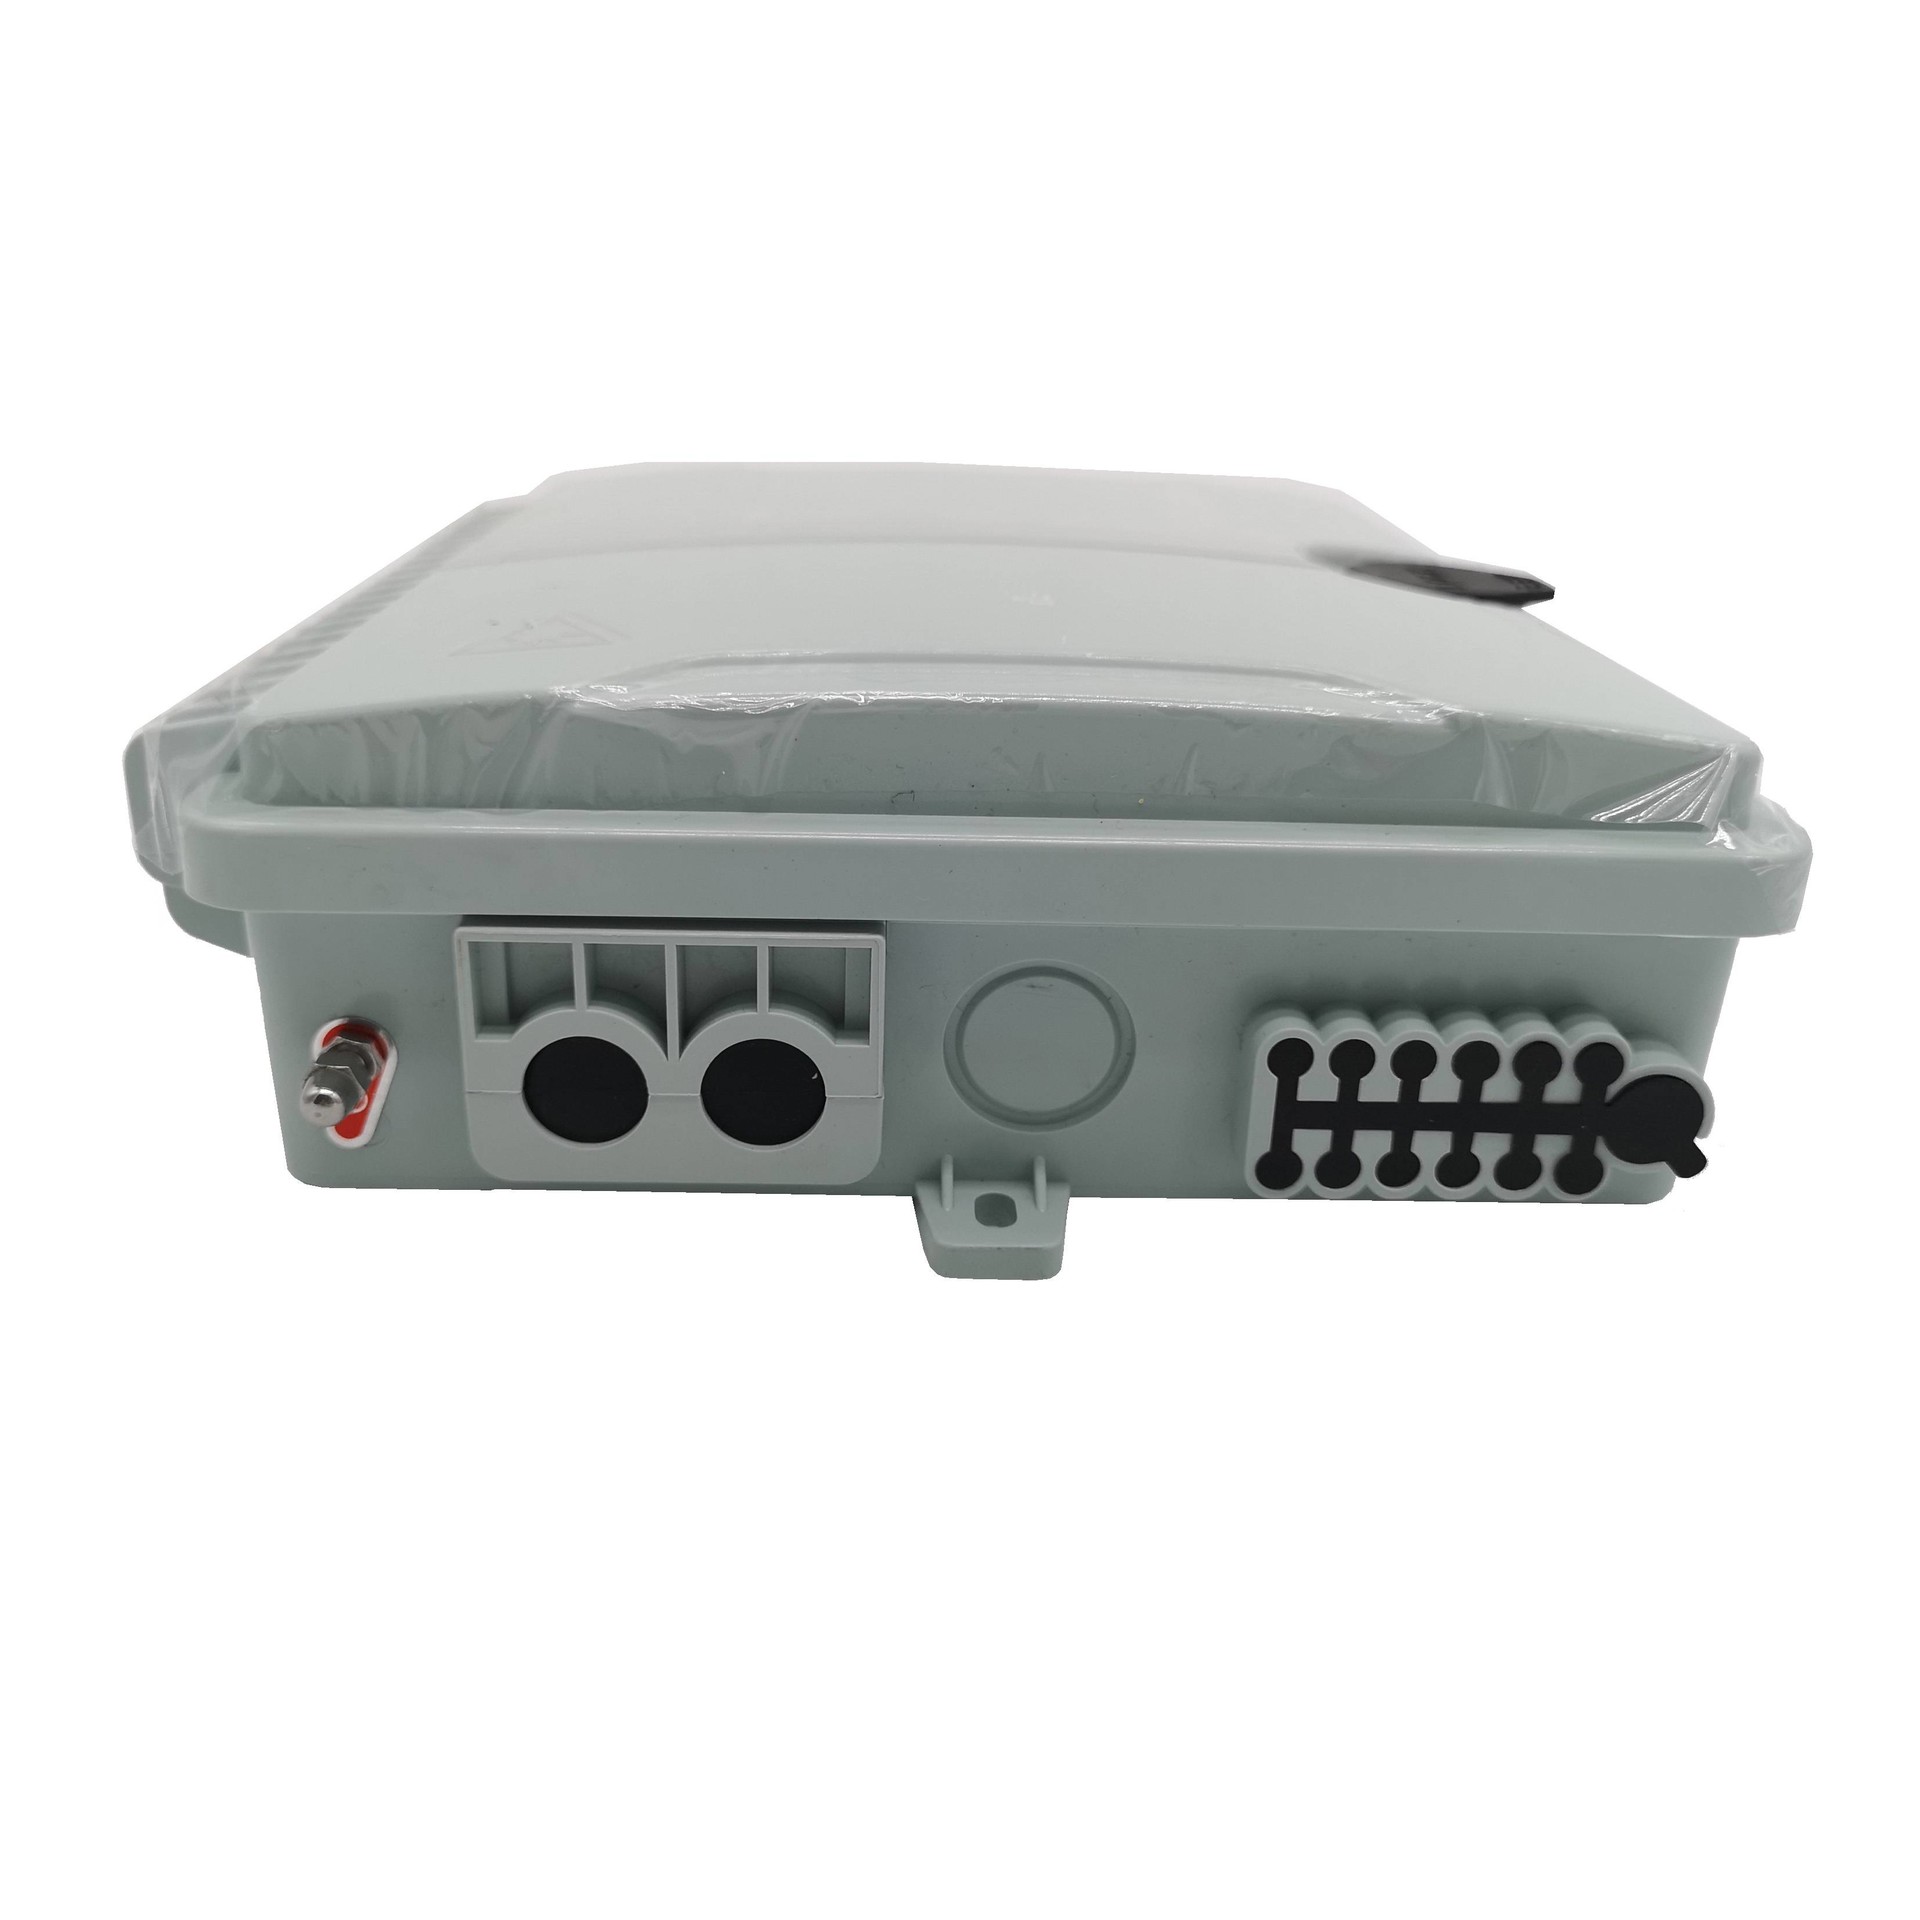 YINGDA passive optical network equipment manufacturers For connection